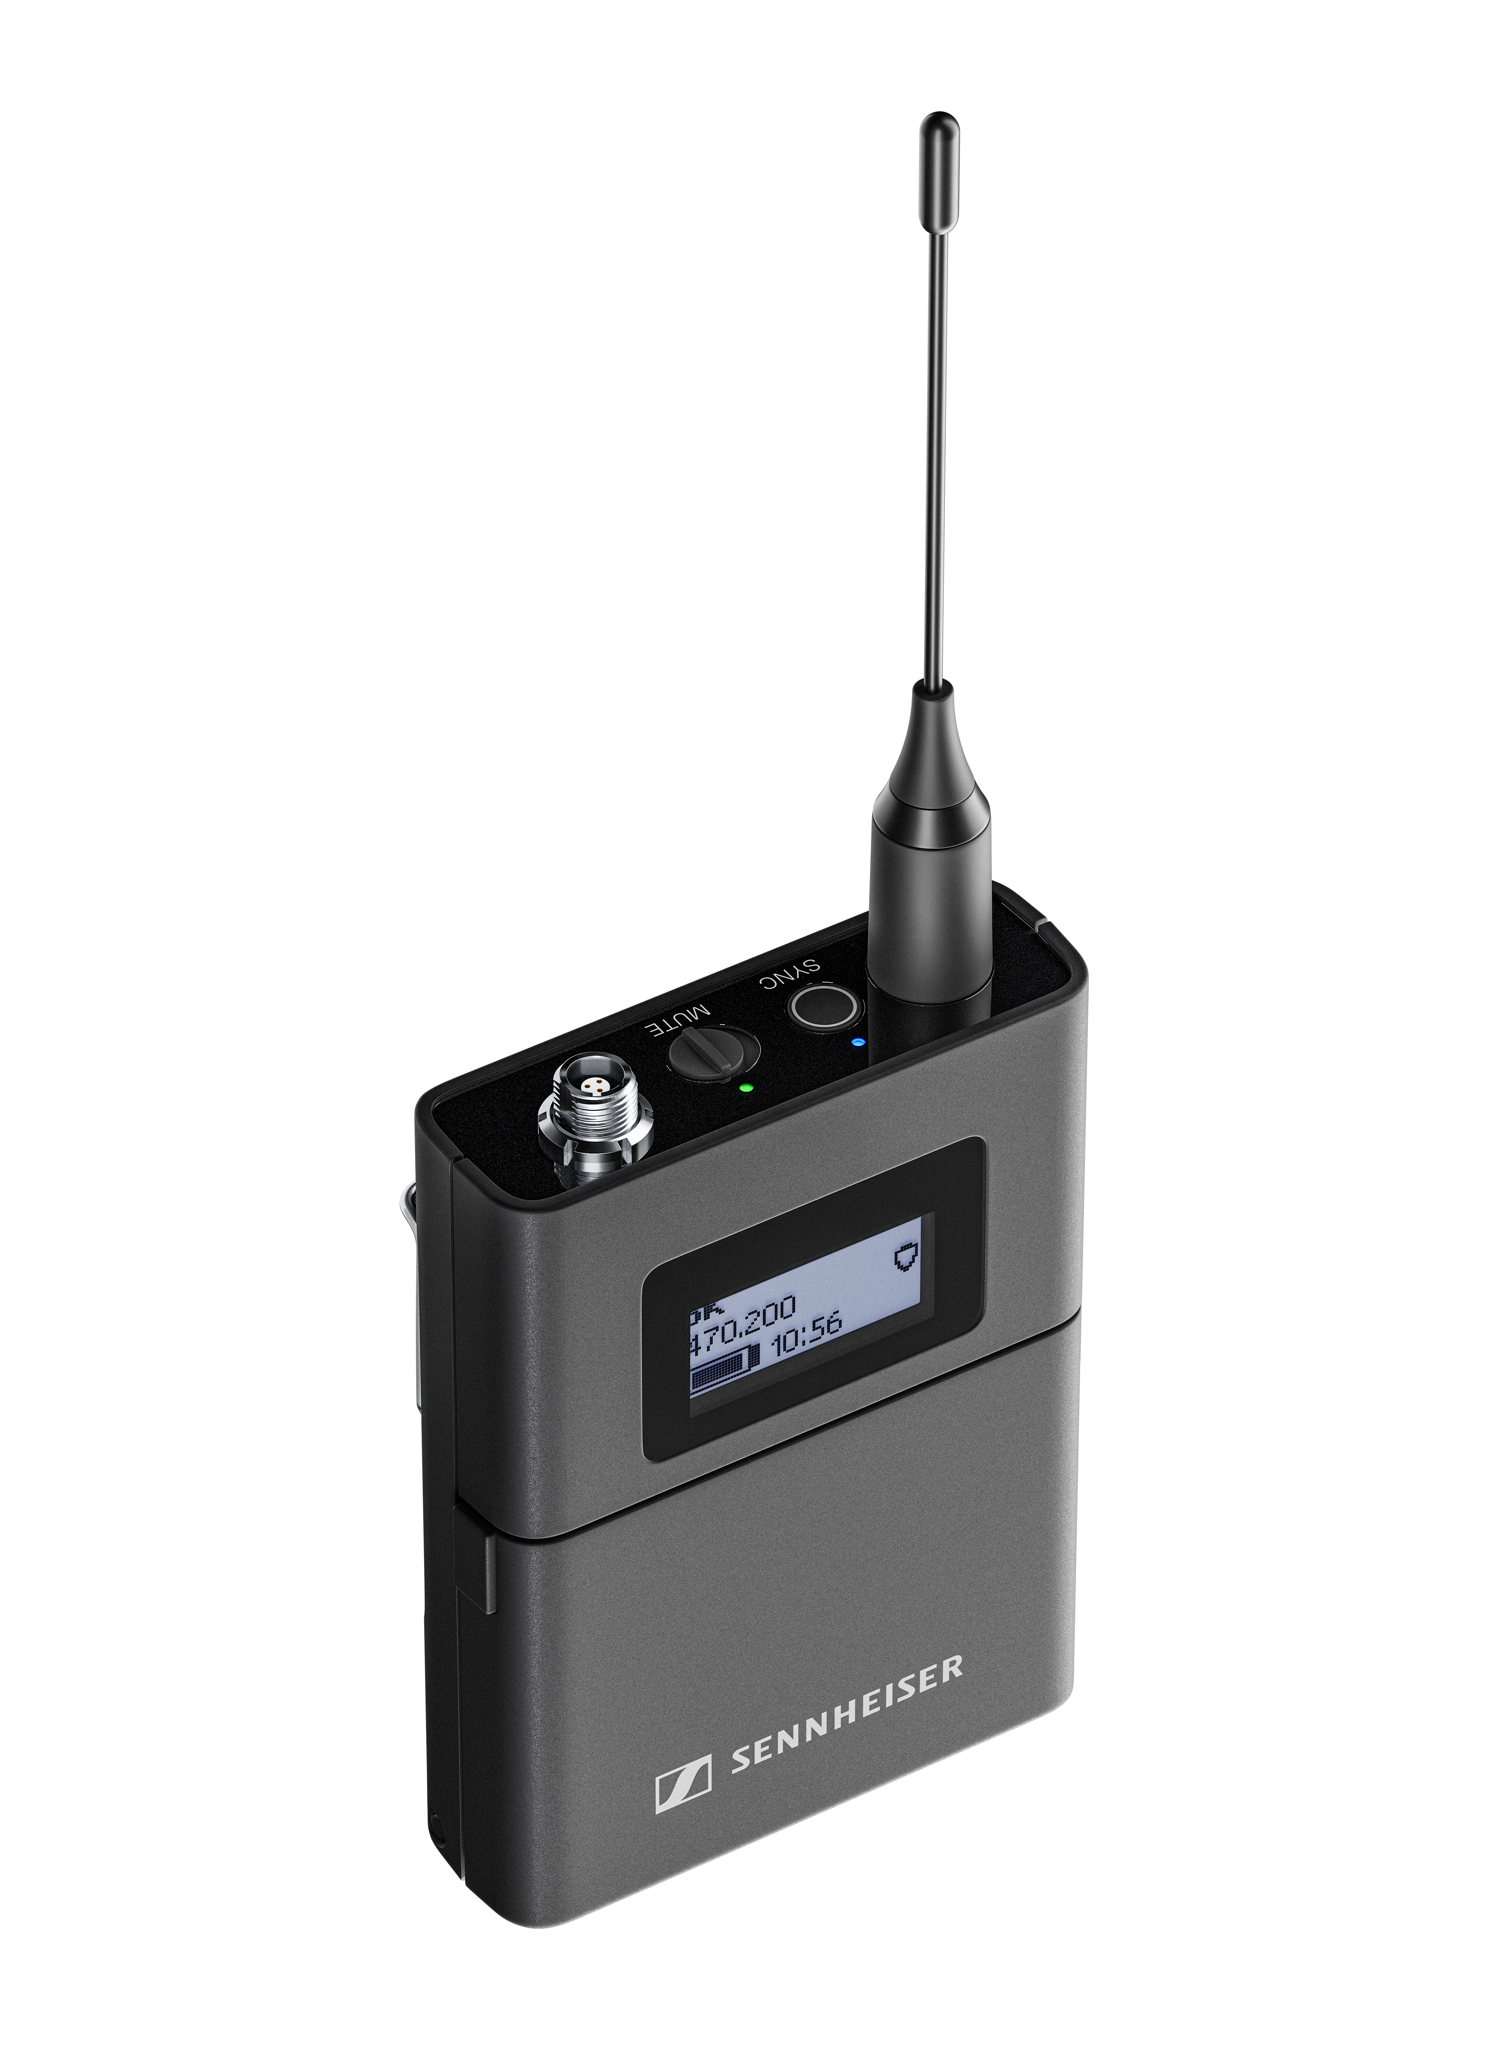 The bodypack transmitter will be available with a 3-pin or a 3.5 mm (1/4”) jack connector